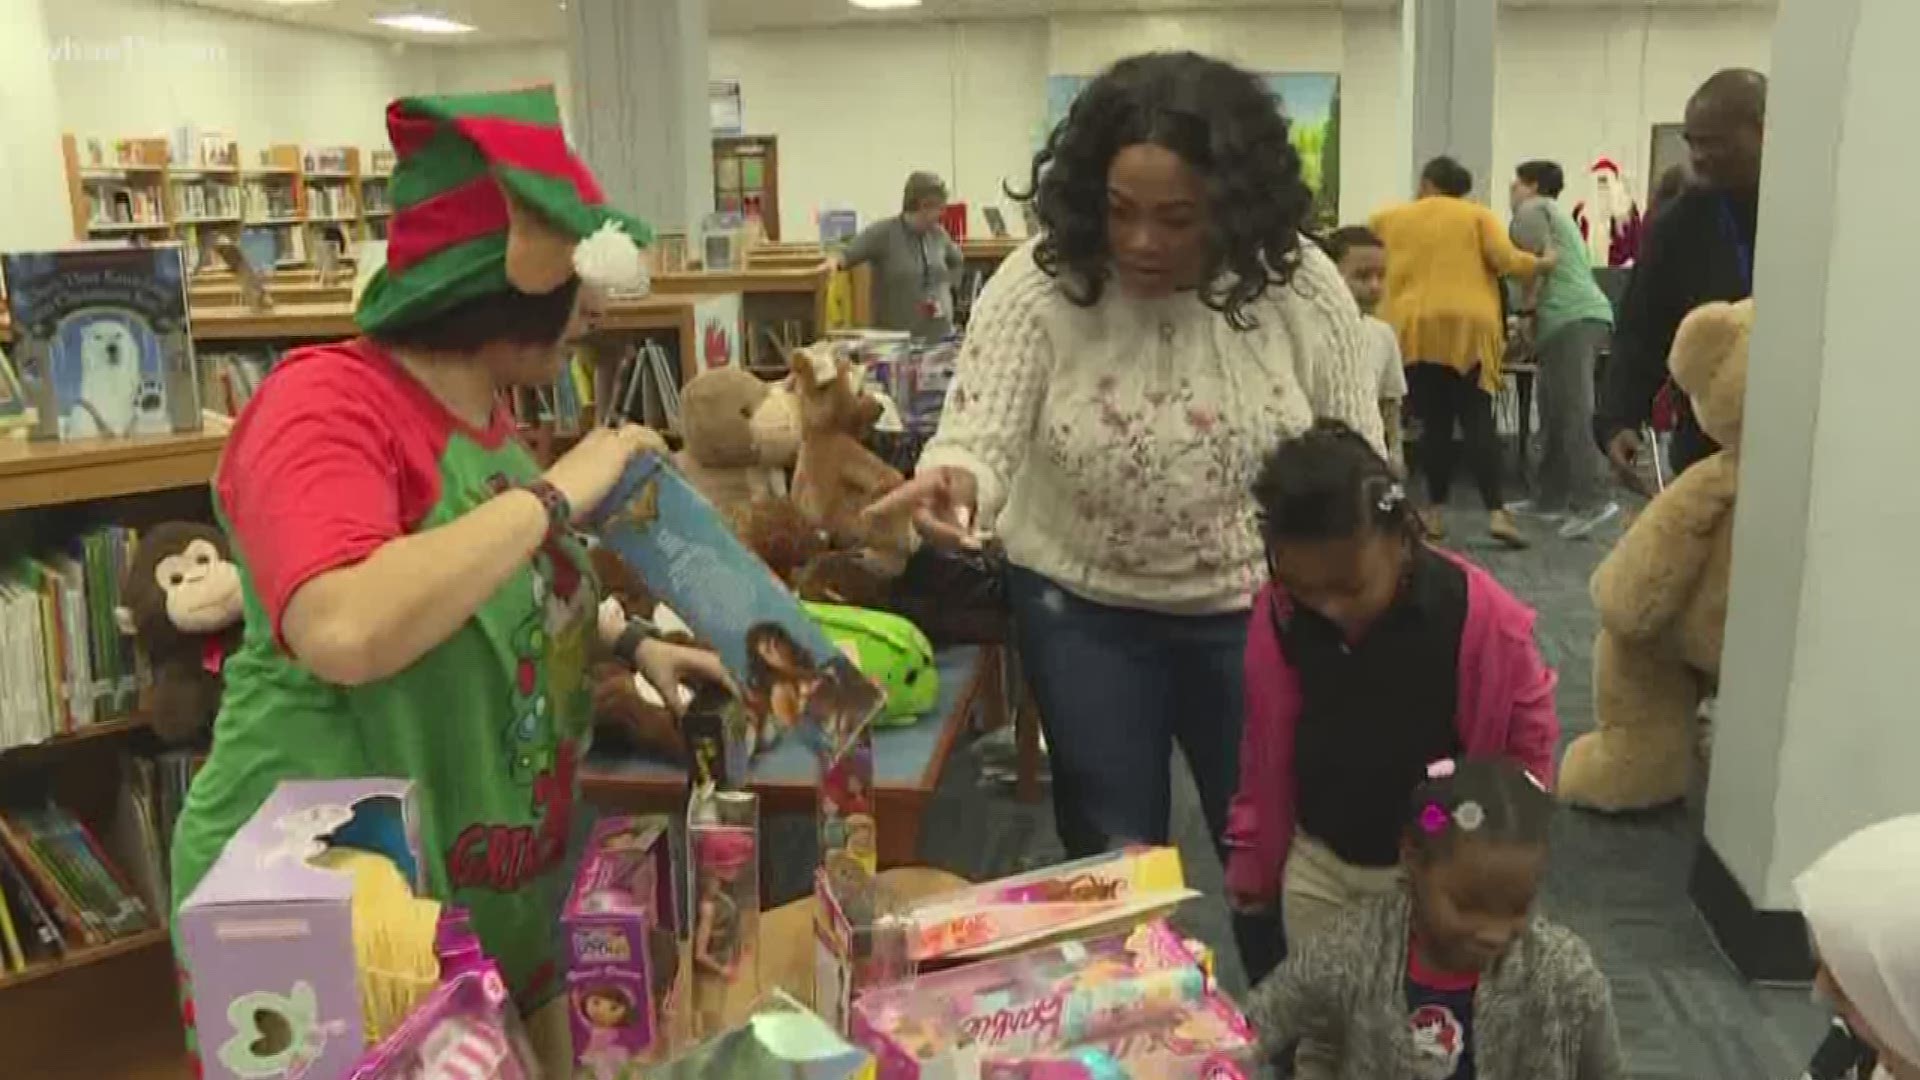 Semple Elementary teamed up with Toys for Tots to give students Christmas gifts before winter break.